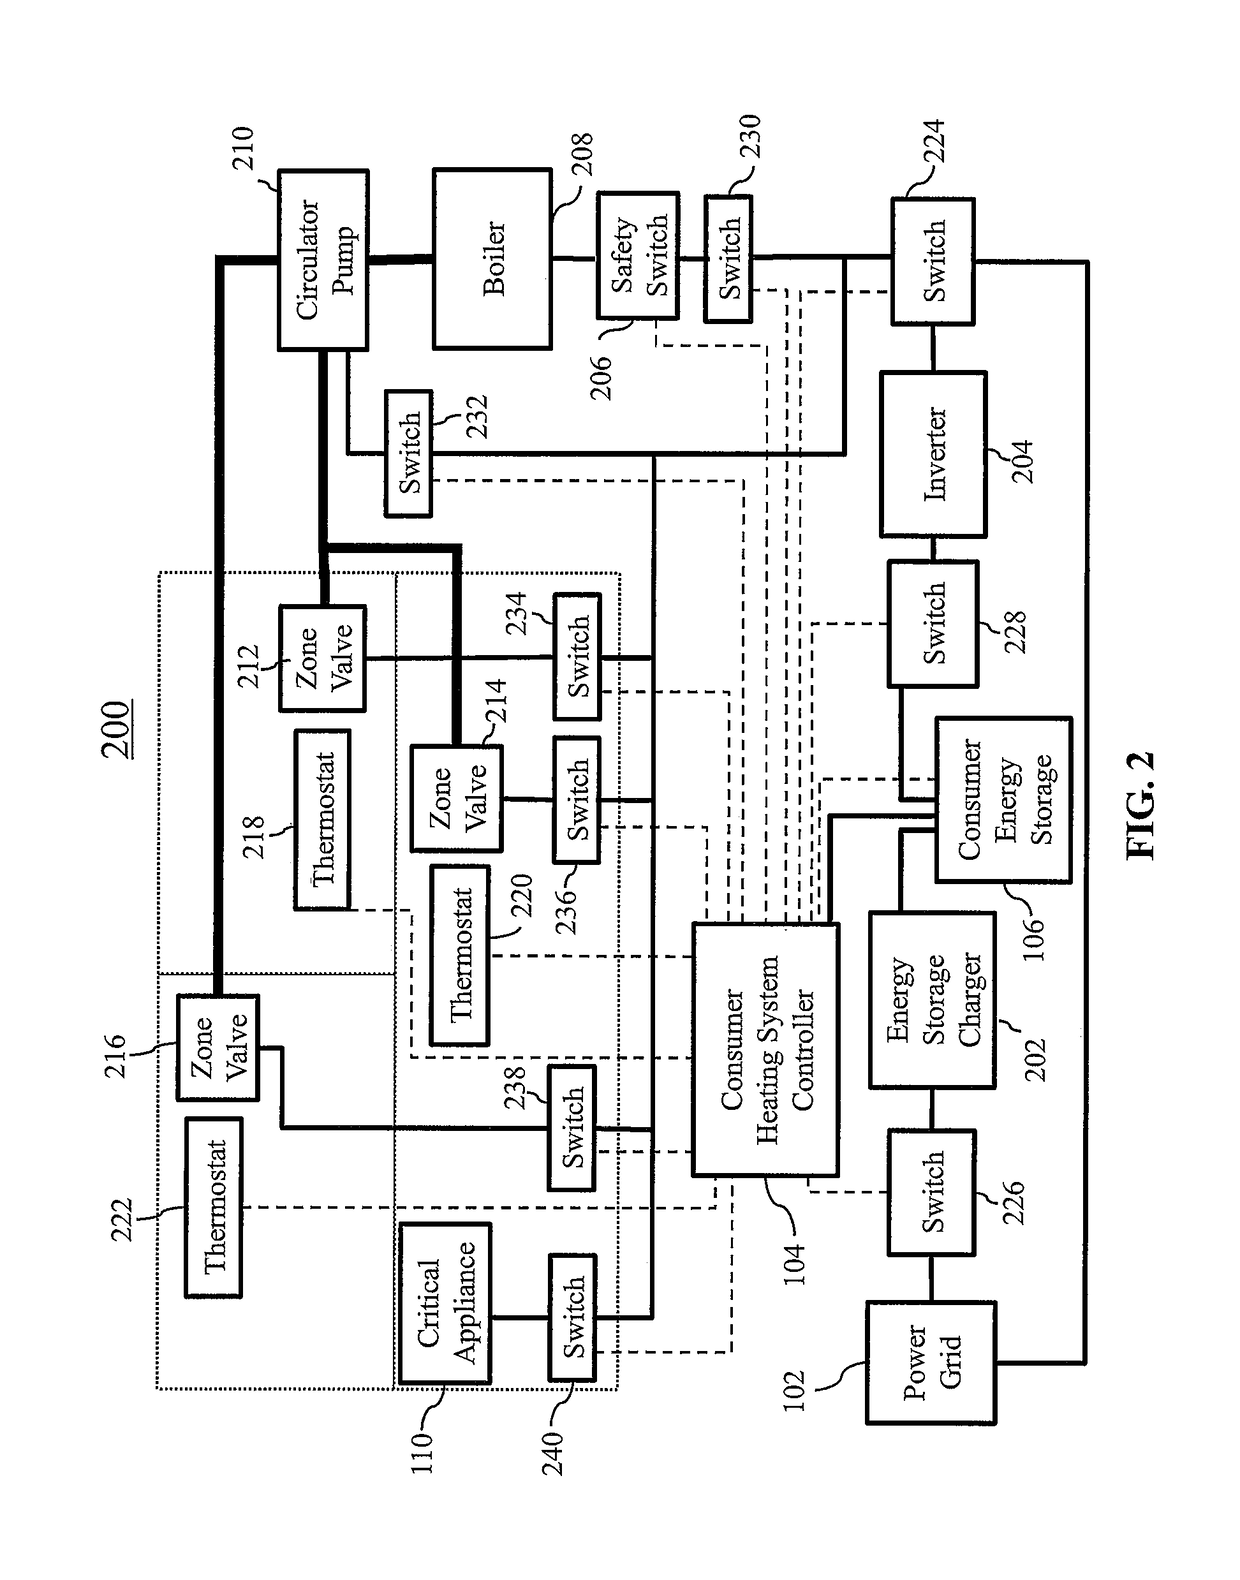 System and methods for controlling a supply of electric energy